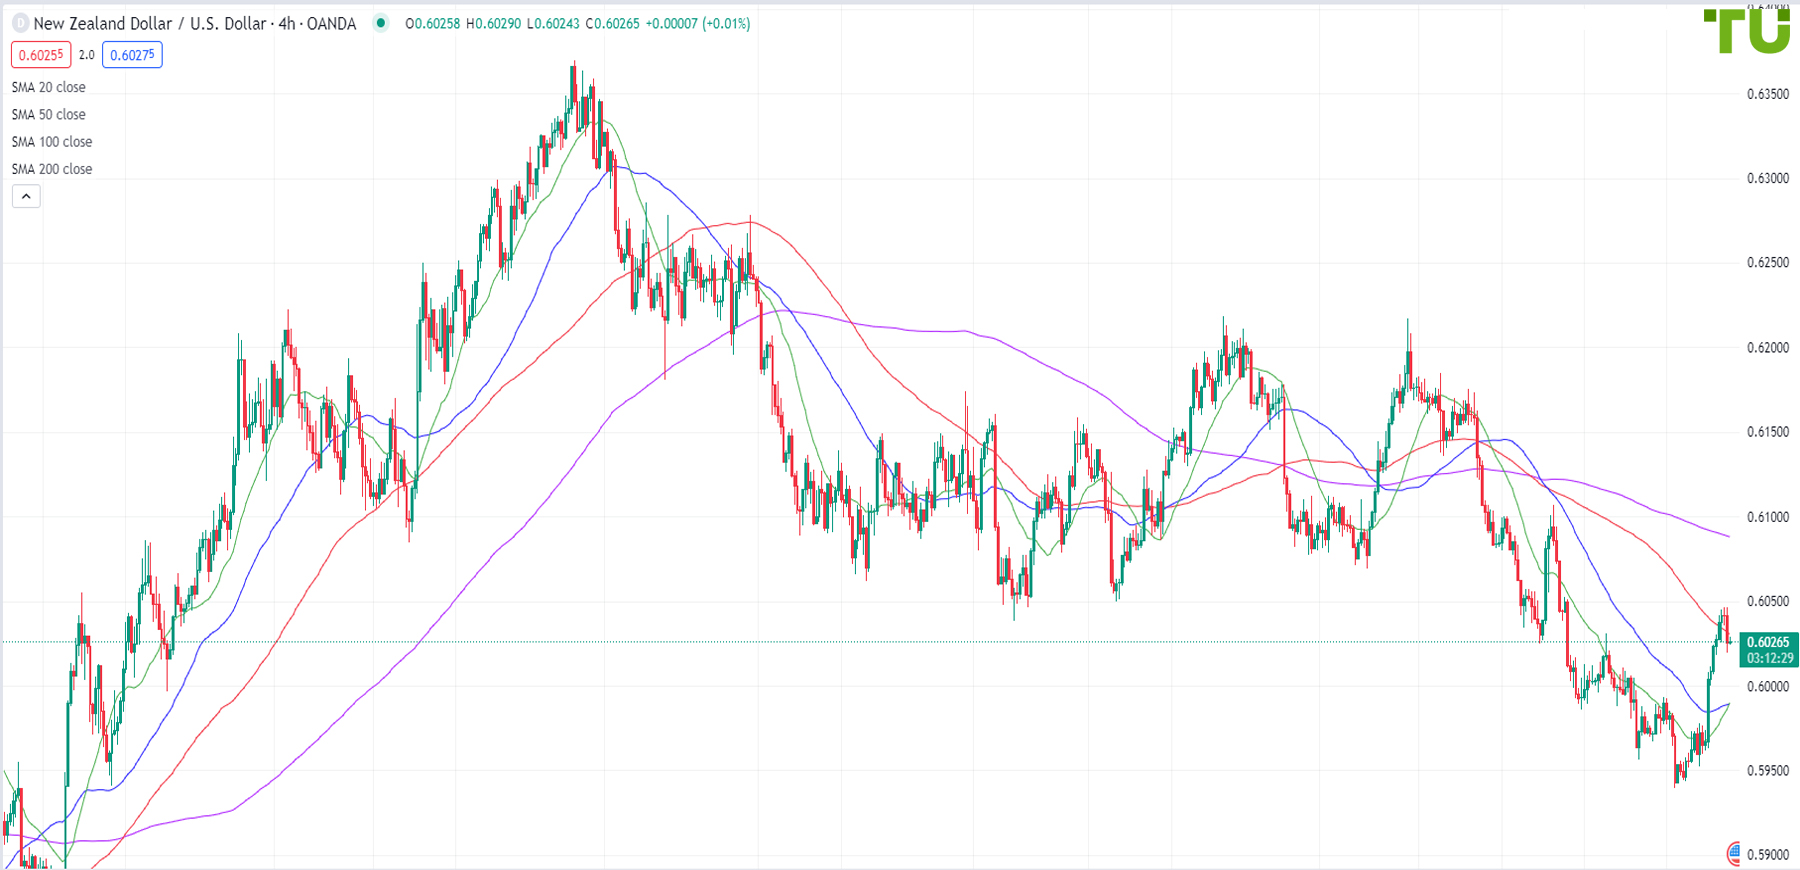 Kiwi/dollar retreated from yesterday's high to support at 0.8020